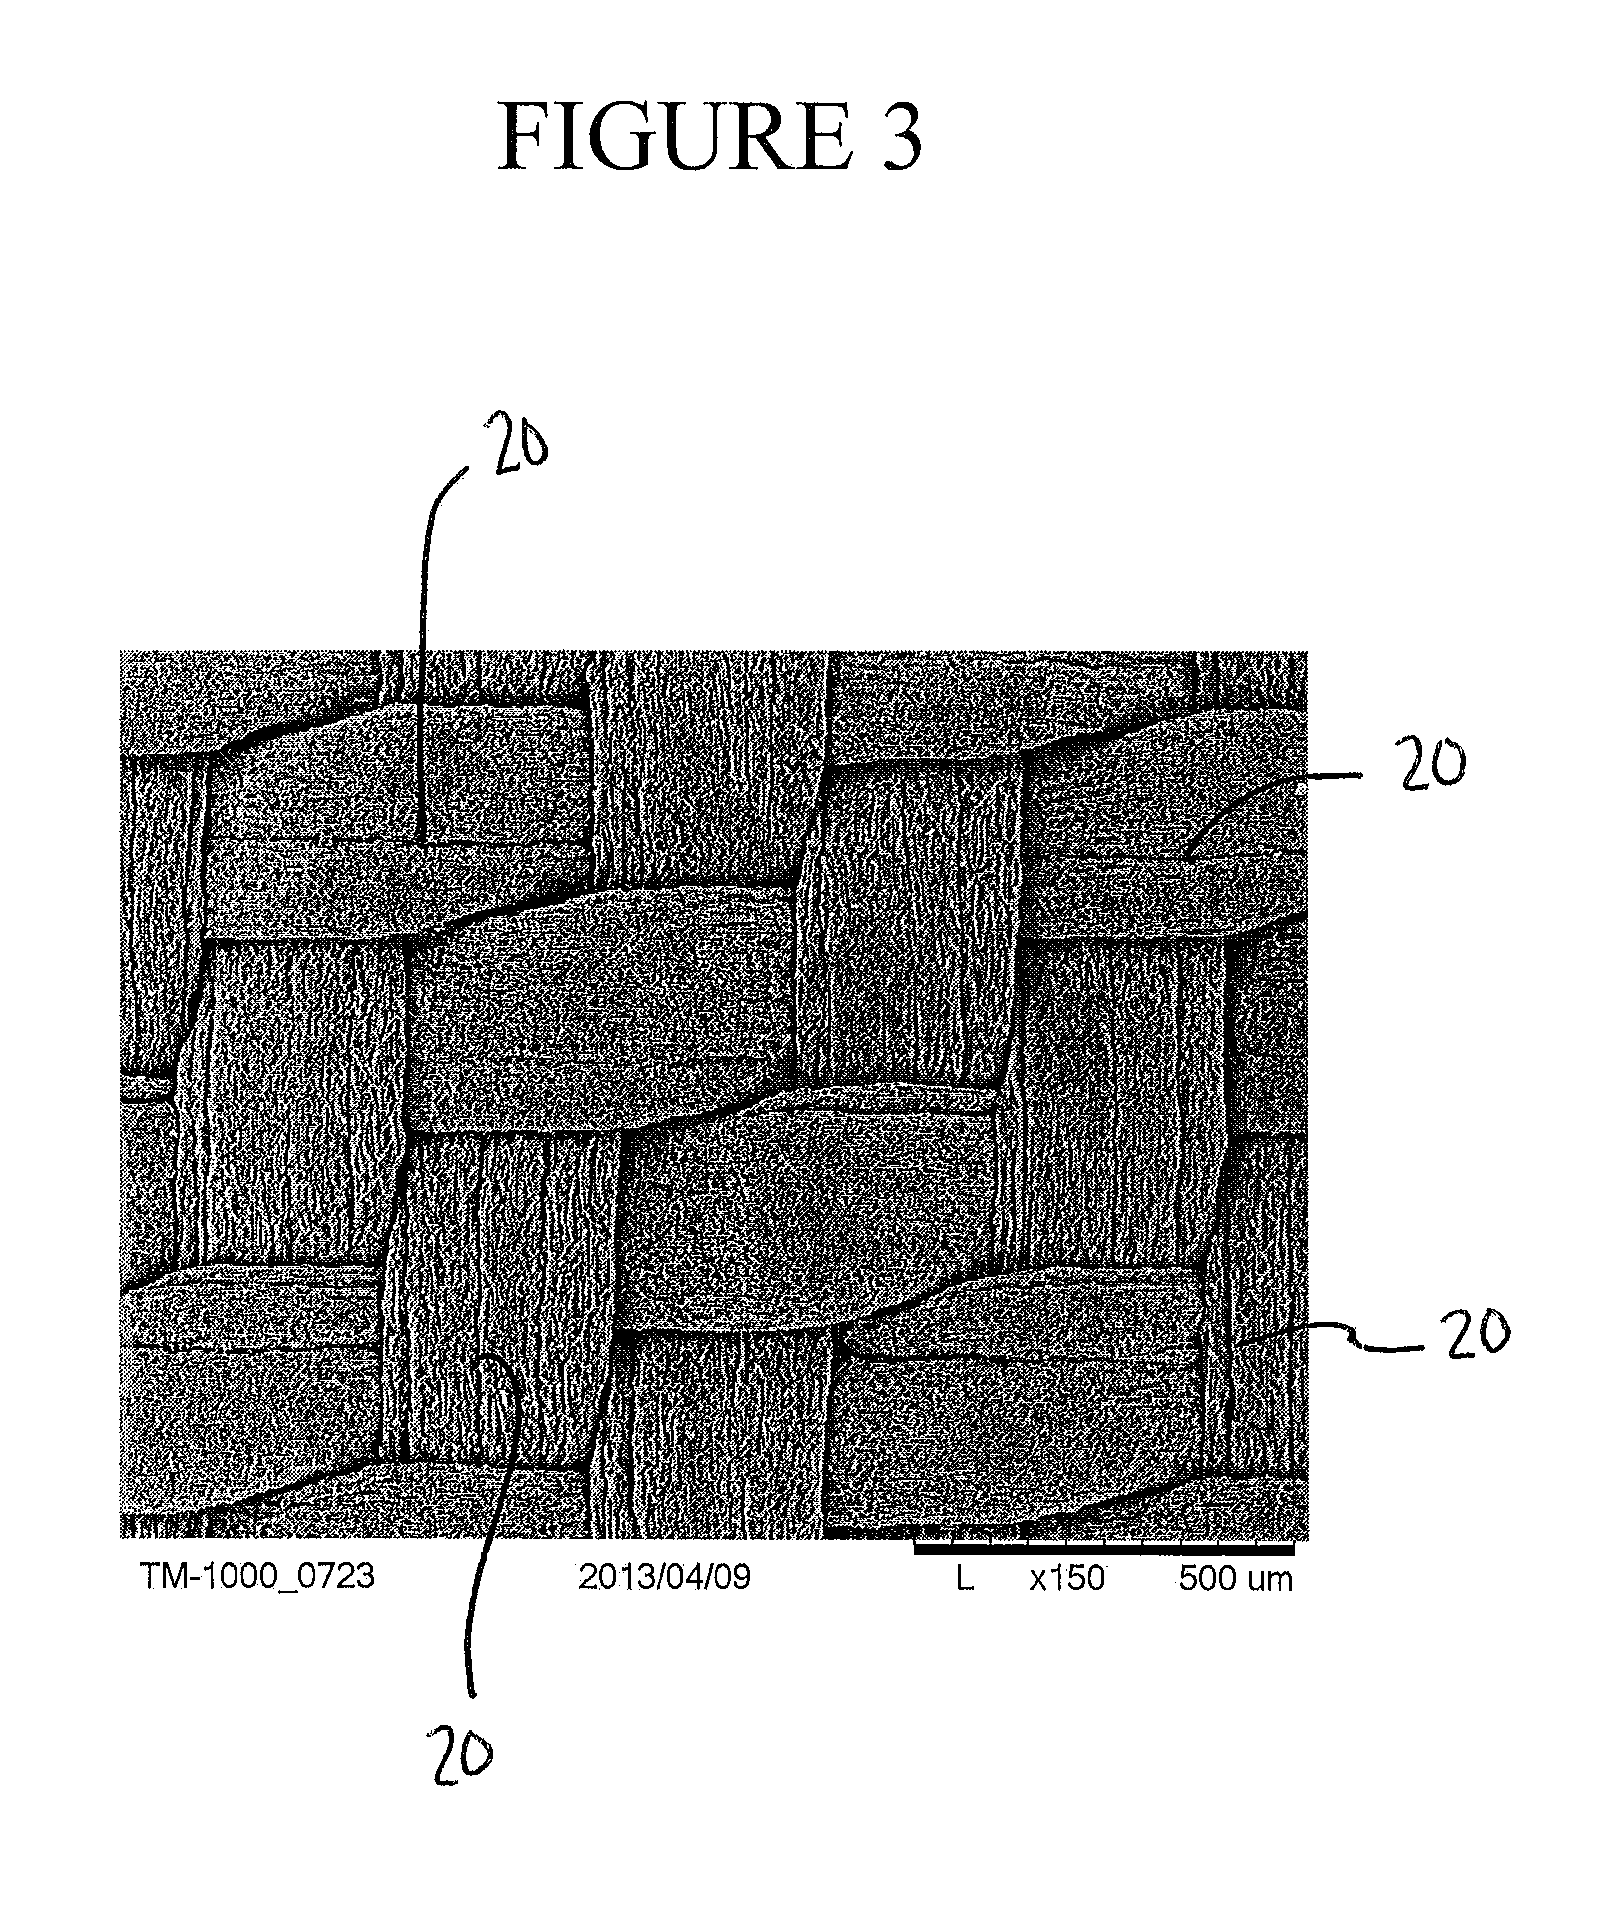 Conformable Microporous Fiber and Woven Fabrics Containing Same